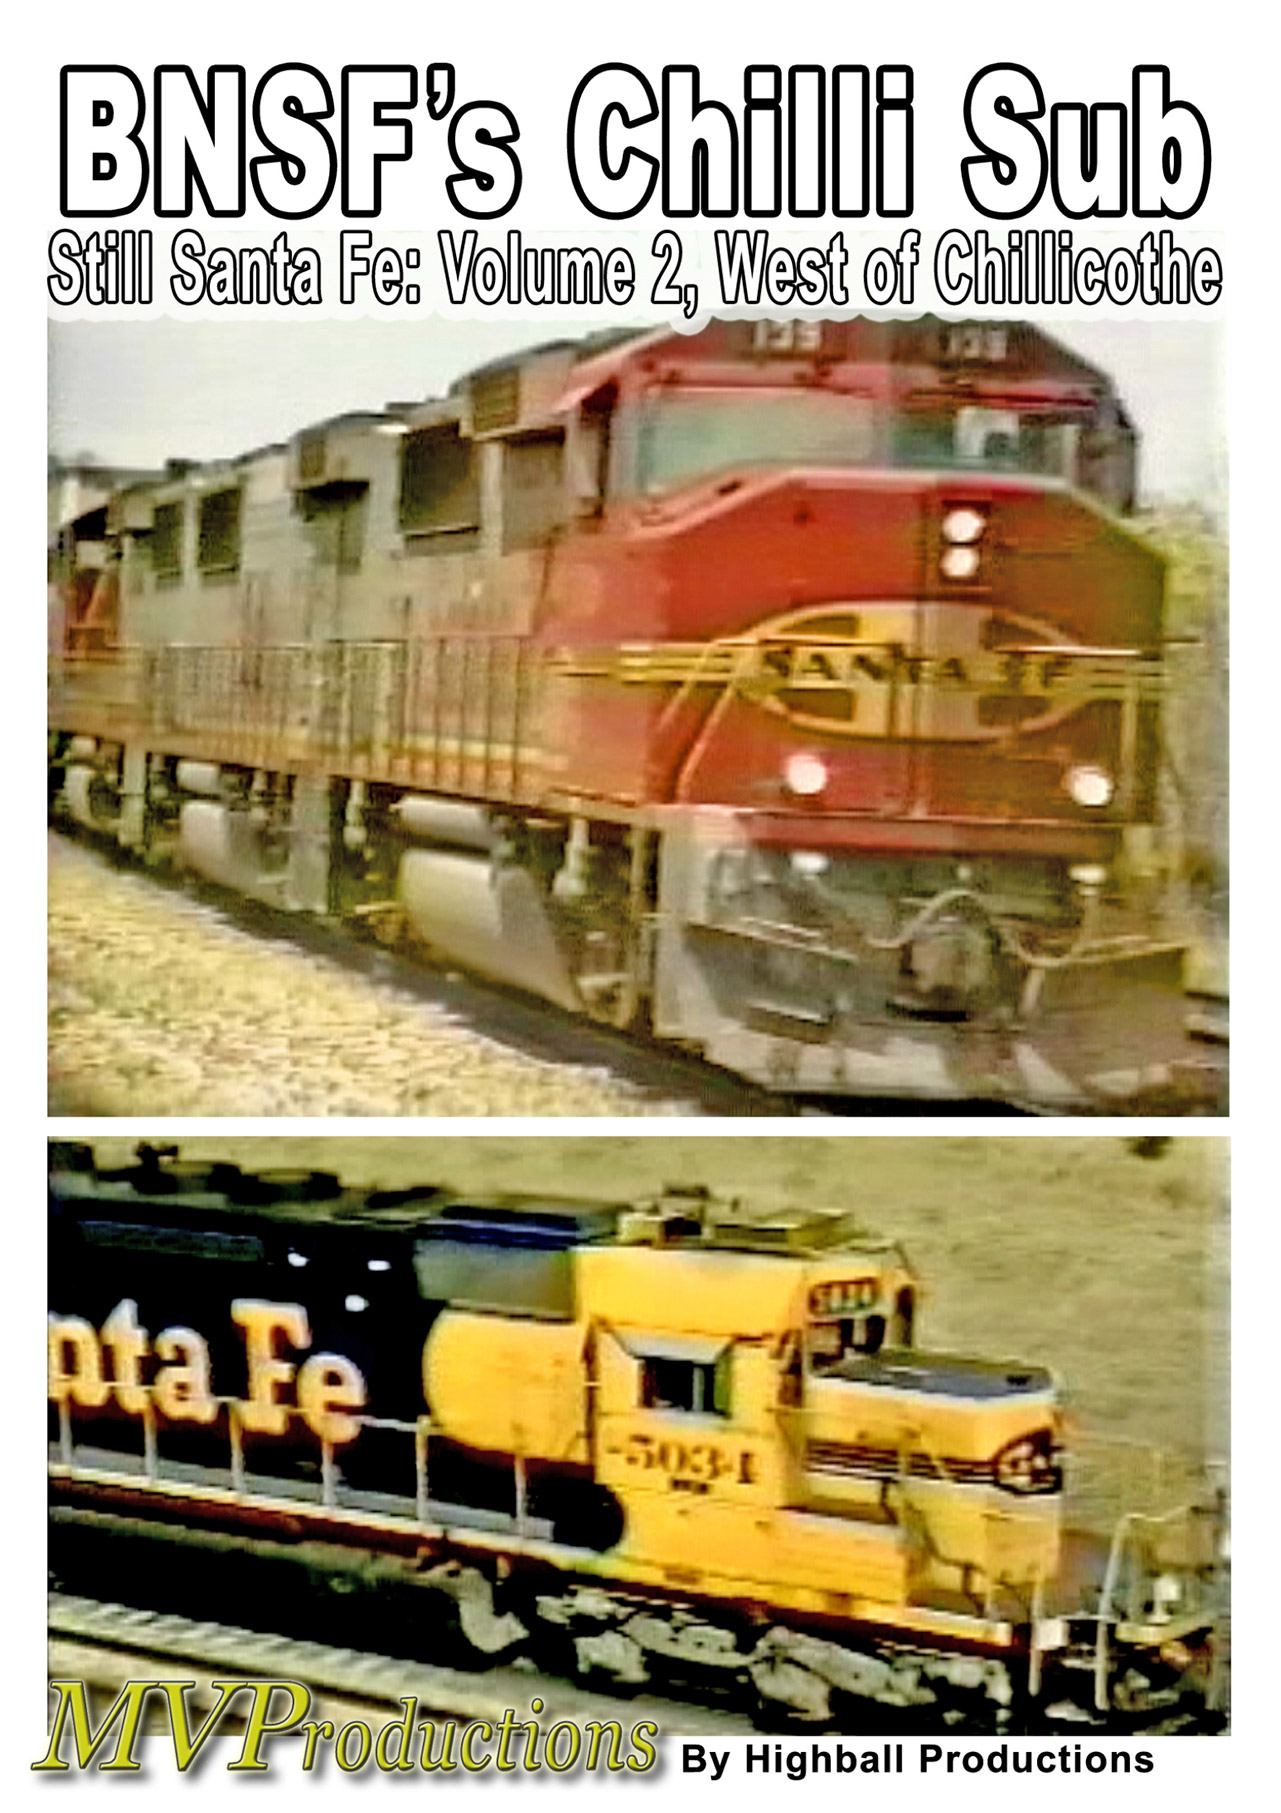 BNSF Chillicothe Sub: Still Santa Fe Volume 2, West of Chillicothe Midwest Video Productions MVCHIL2 601577880134